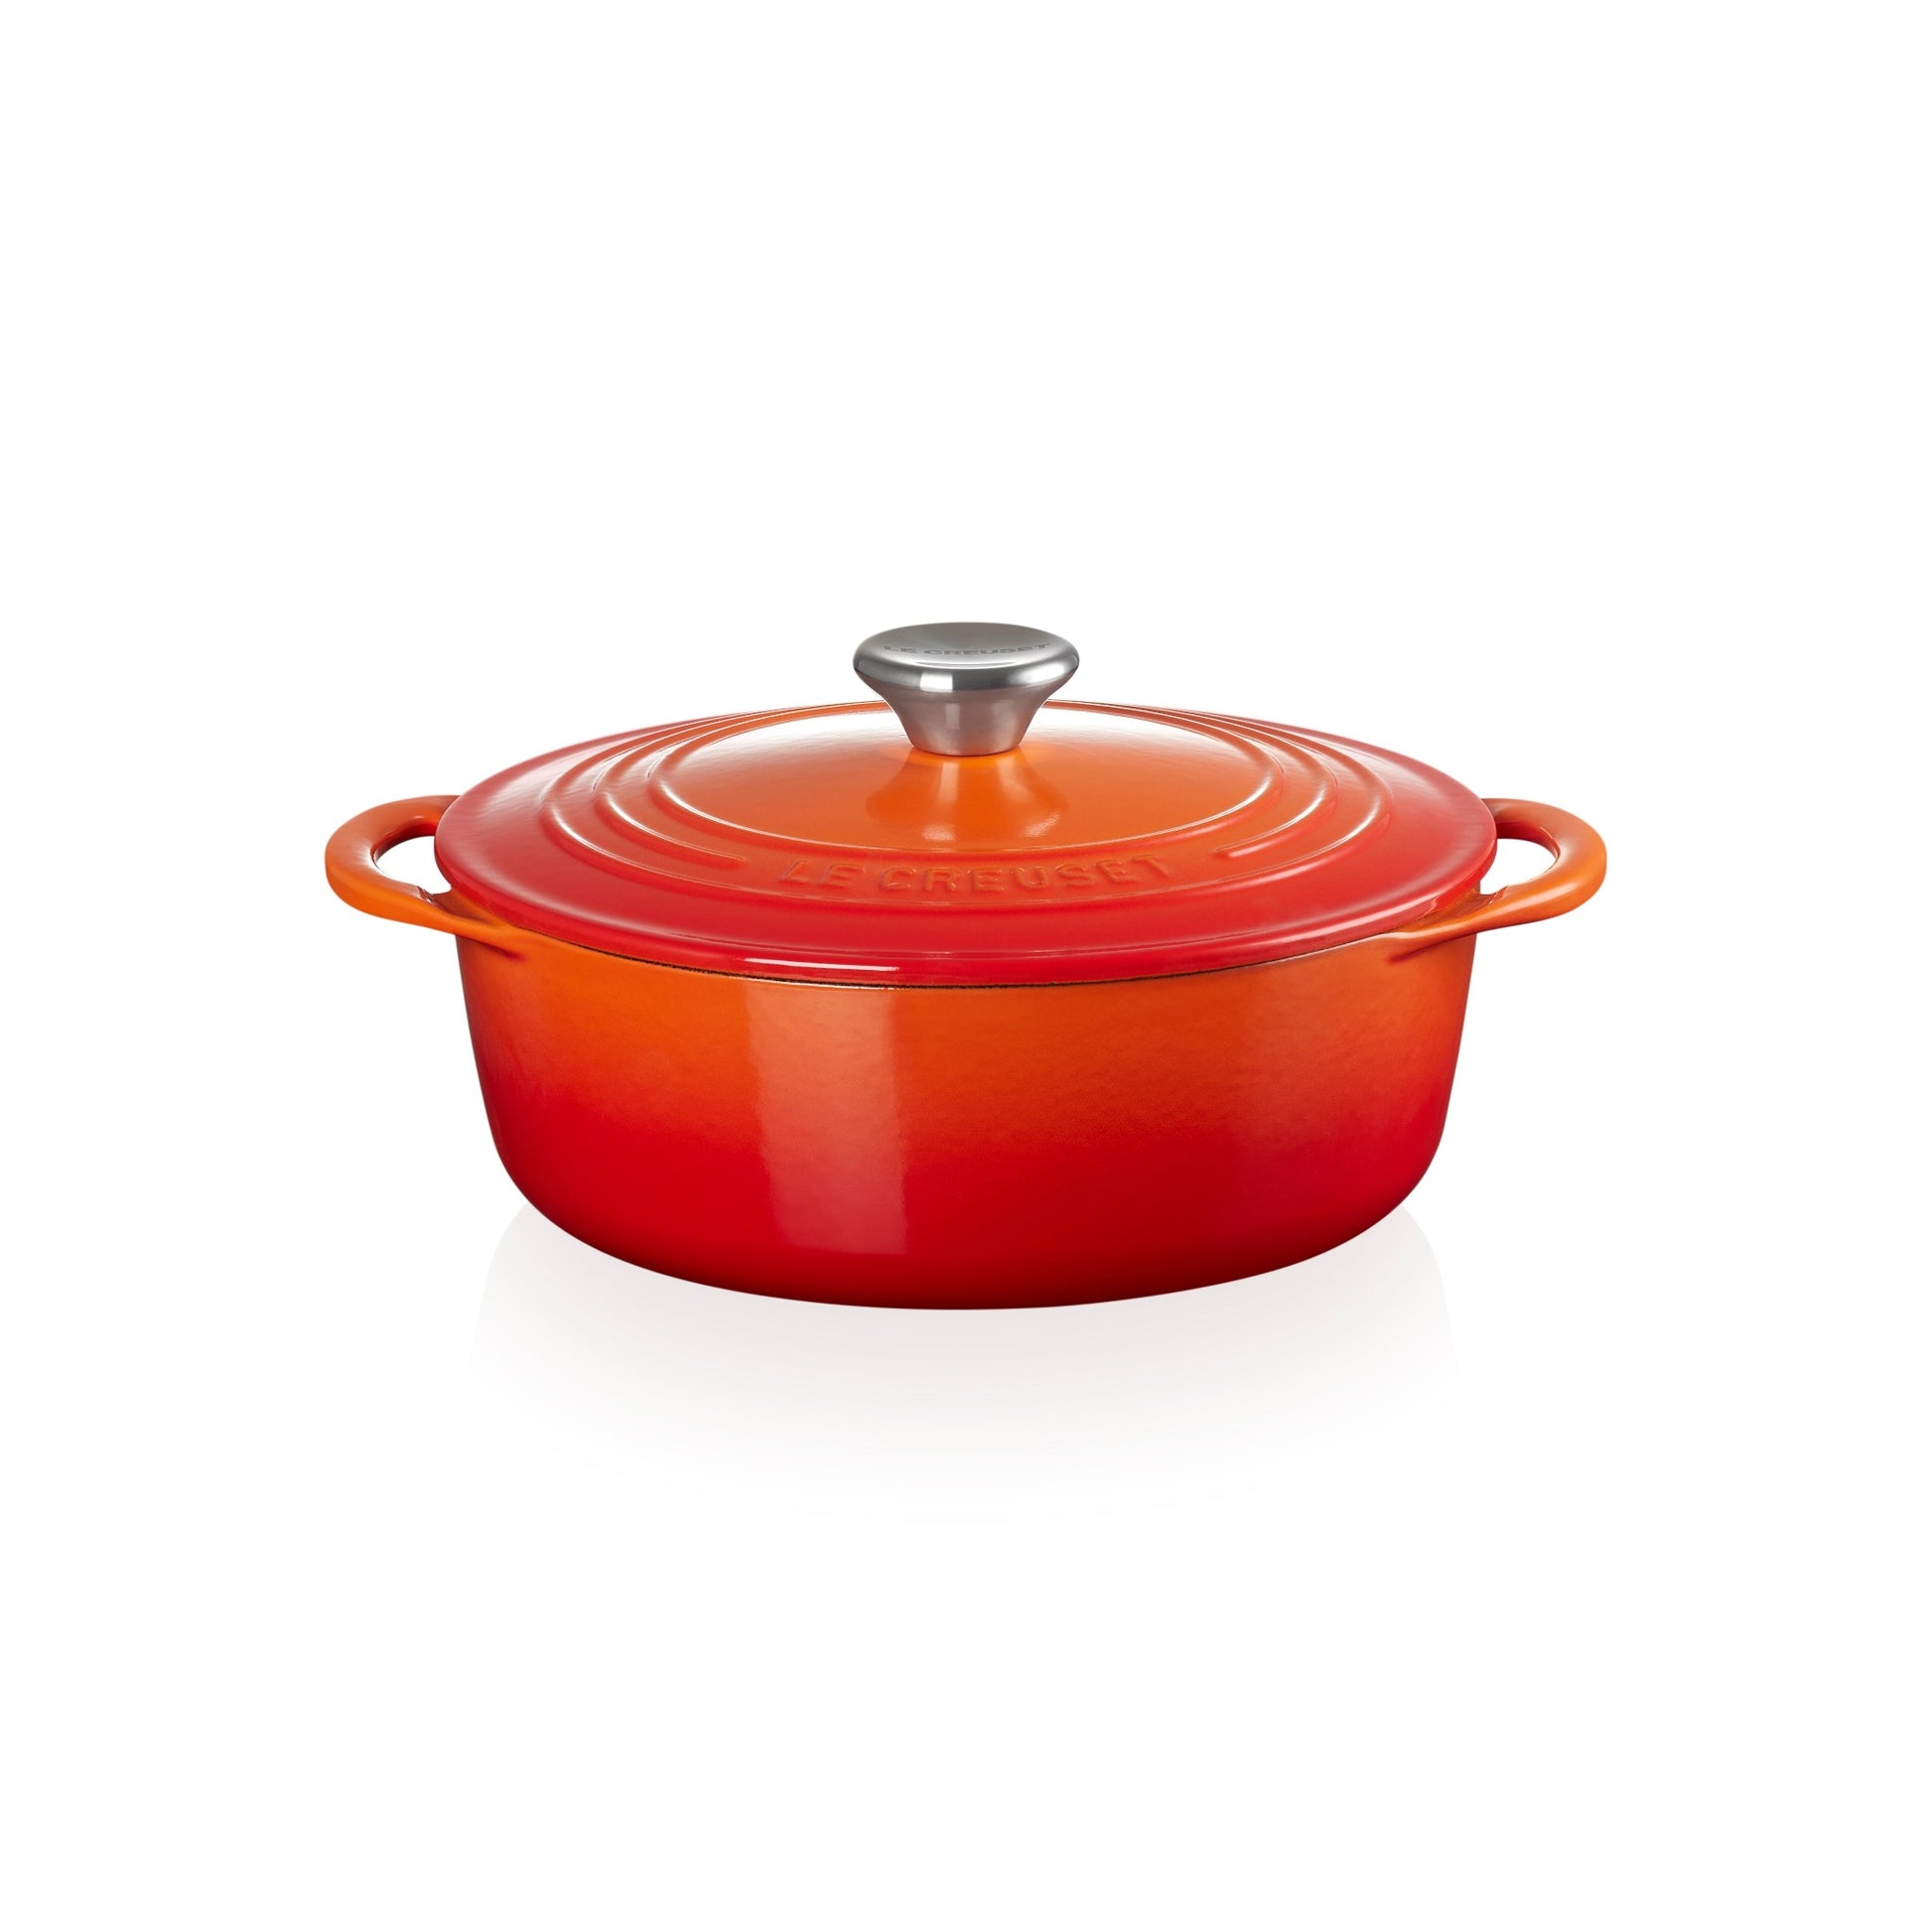 a red and orange ombre casserole dish with matching lid